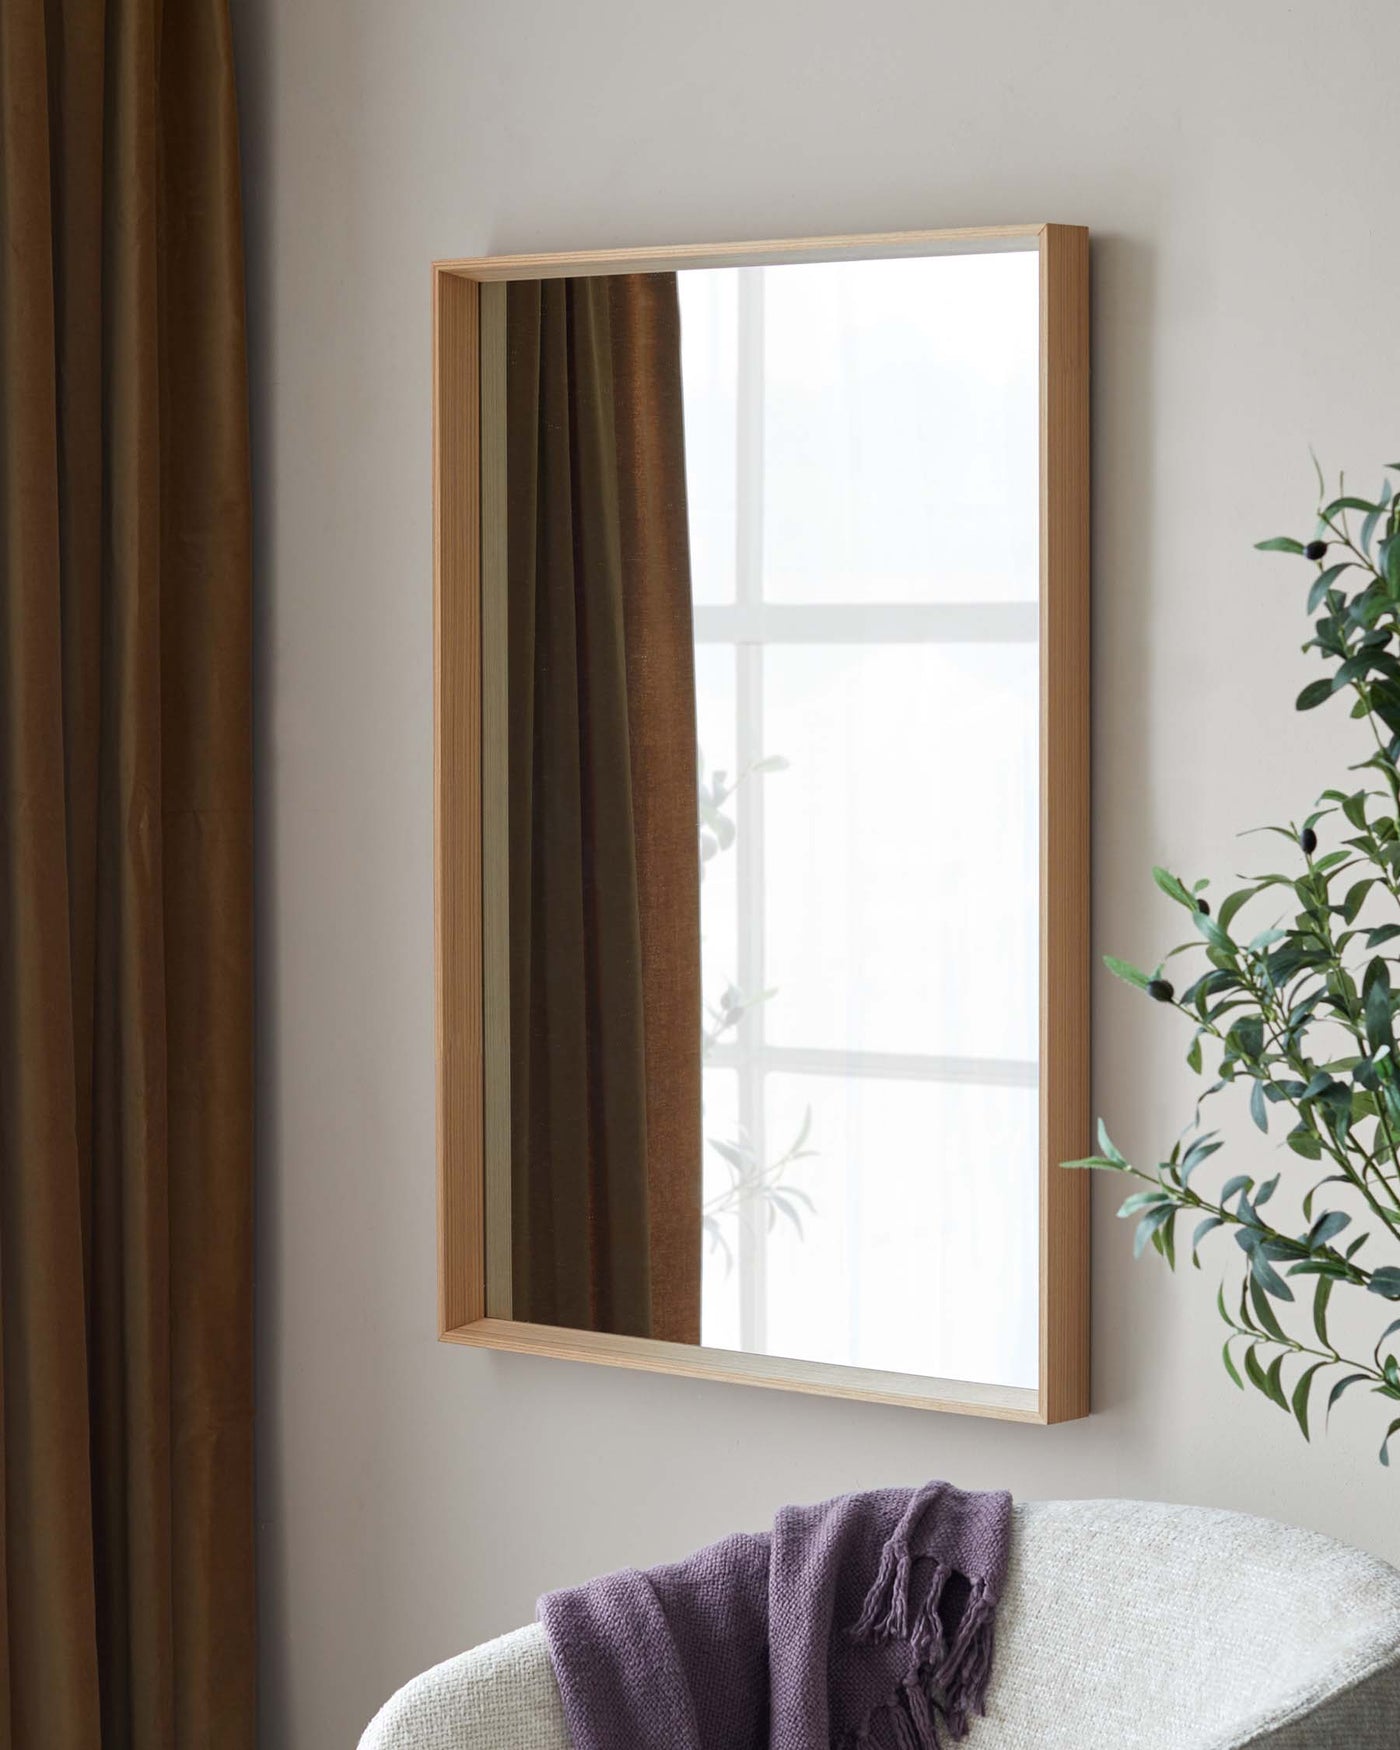 A modern, minimalist wooden-framed mirror mounted on a wall above an off-white, textured fabric armchair with a purple throw blanket casually draped over one armrest.